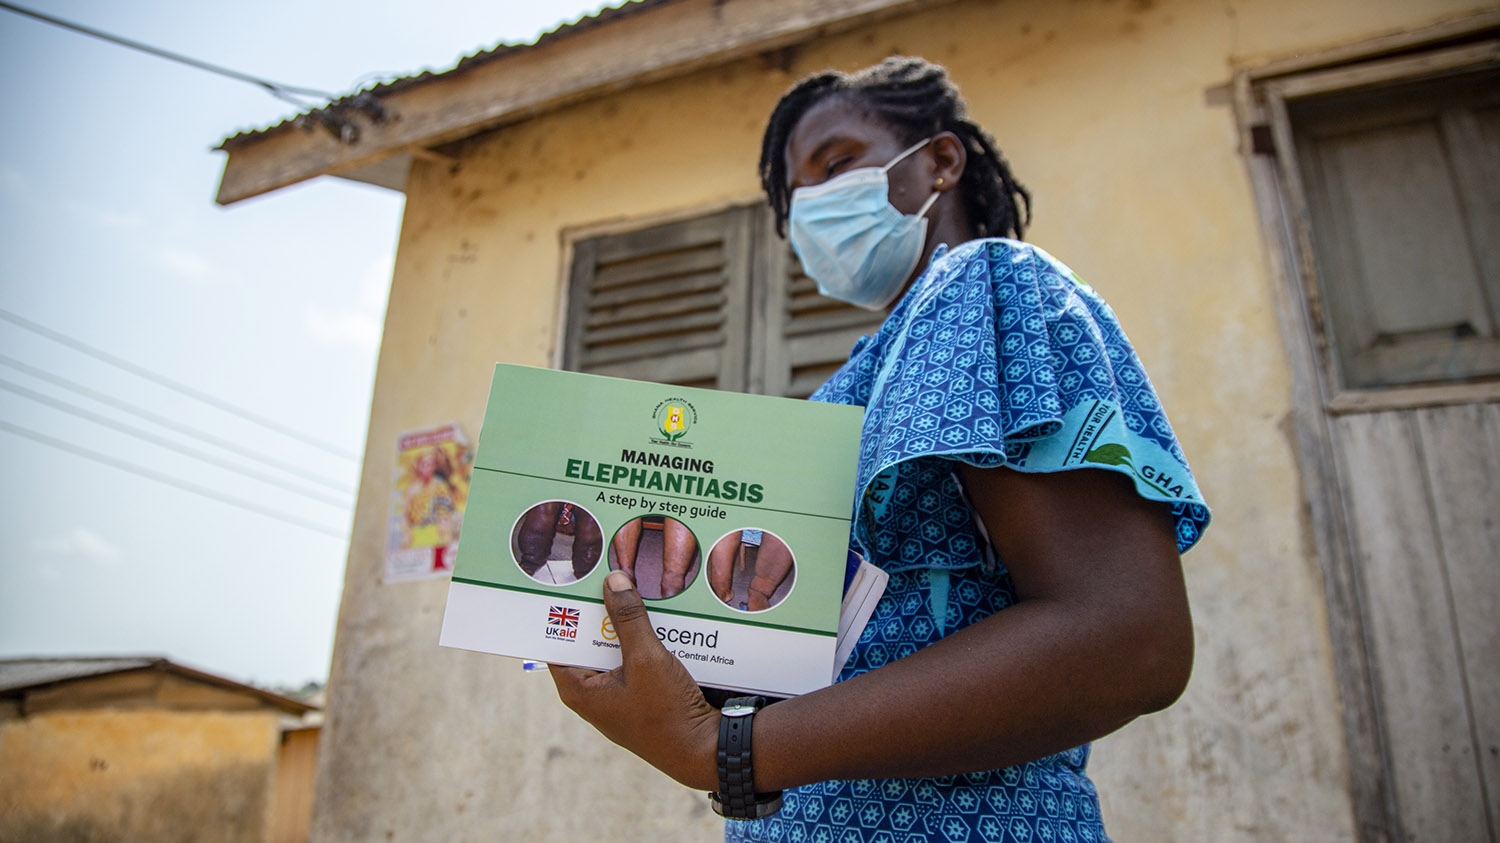 Patient, a health worker, carries leaflets on elephantiasis.